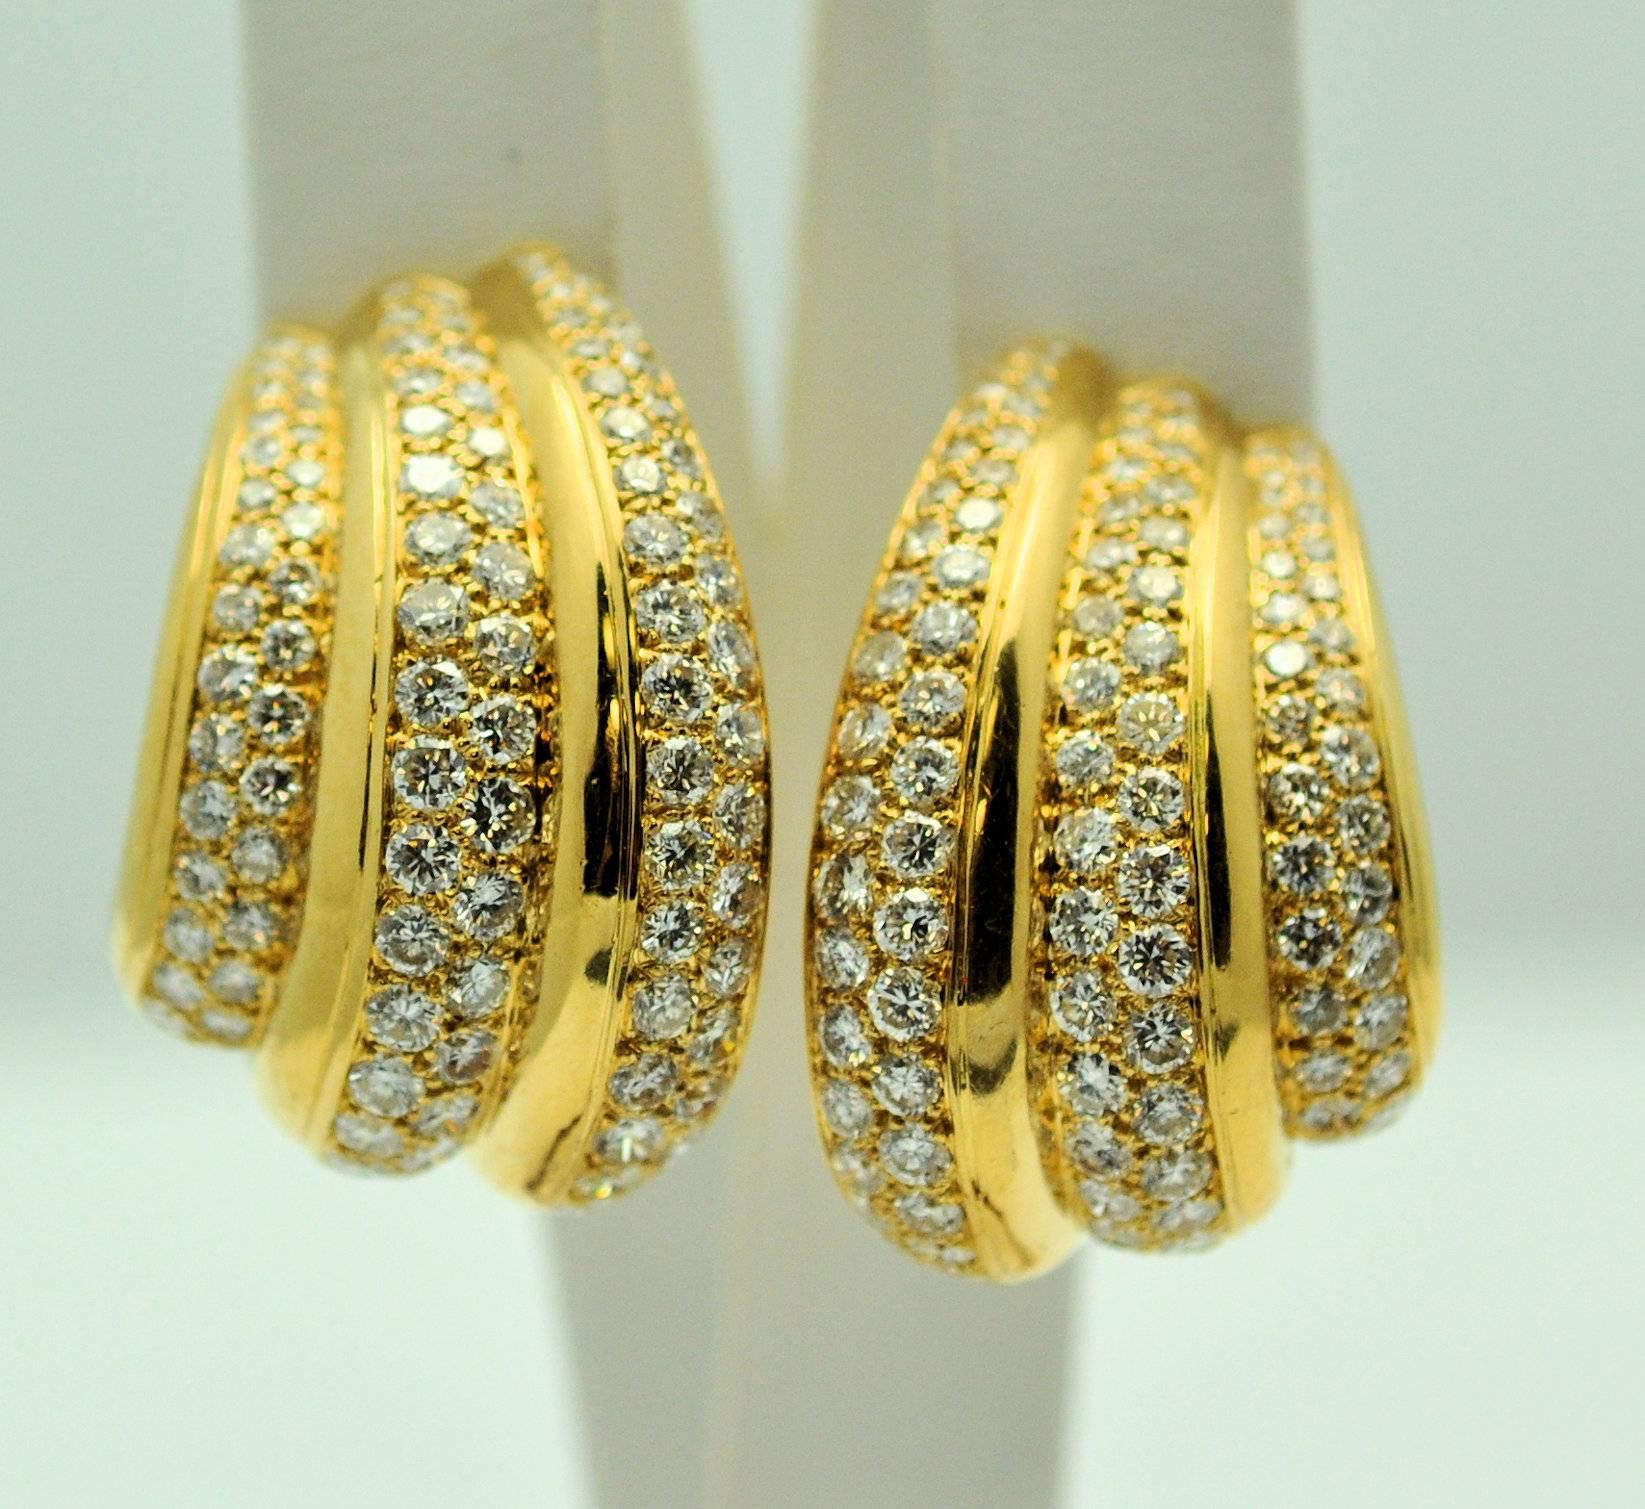 Large and lovely pair of Van Cleef and Arpels triple row pave diamond earrings, pierced/clip.  18Karat yellow gold and set with 294 round brilliant cut diamonds approximately 10.00 carats of grade VS-1, G.  Signed VCA #57260 NY. 16.6 DWT.